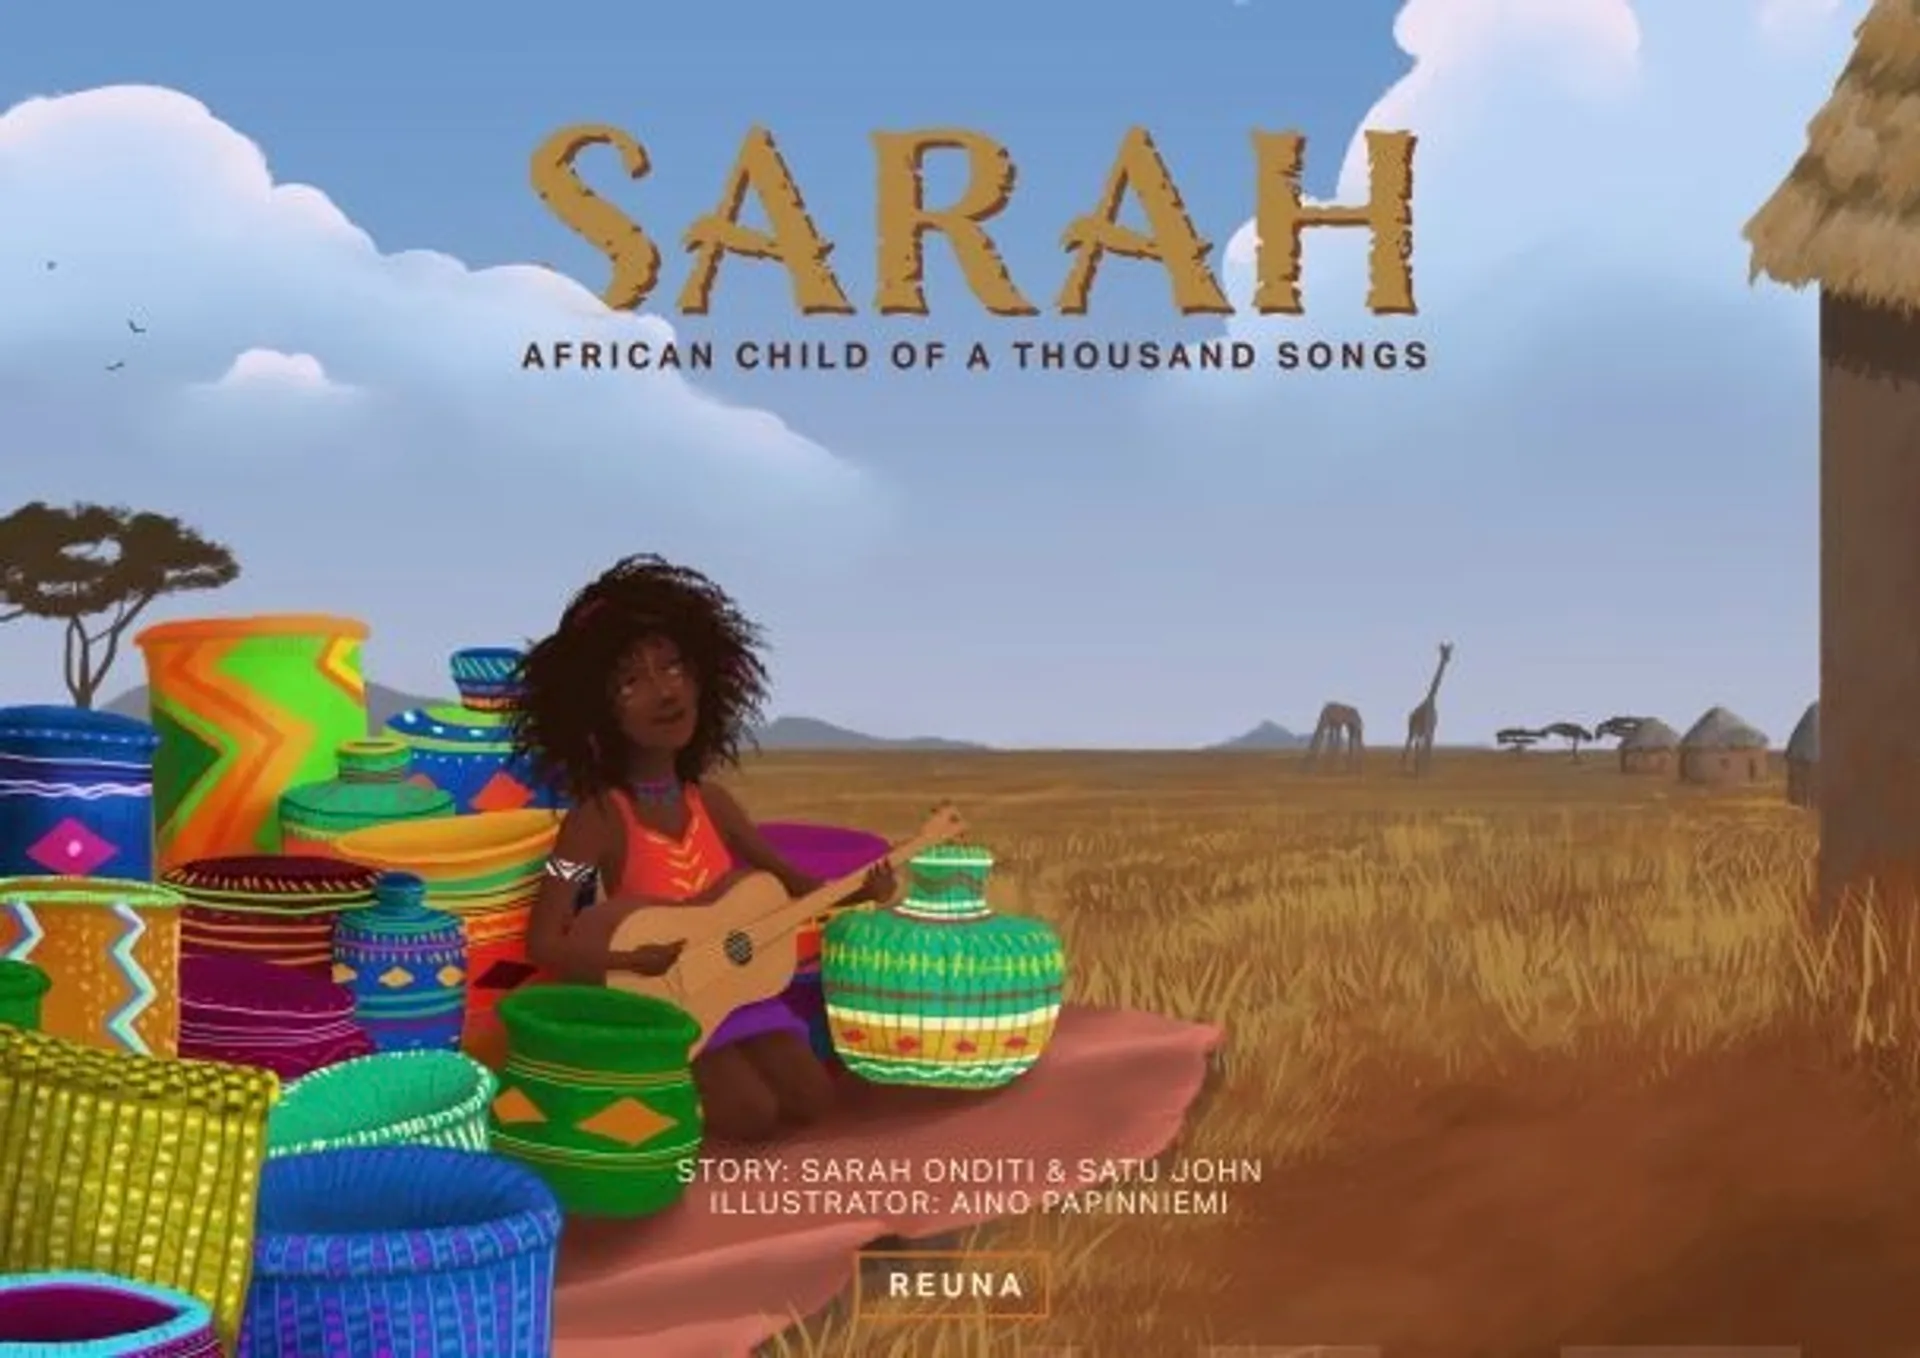 Onditi, Sarah, African Child of a Thousand Songs